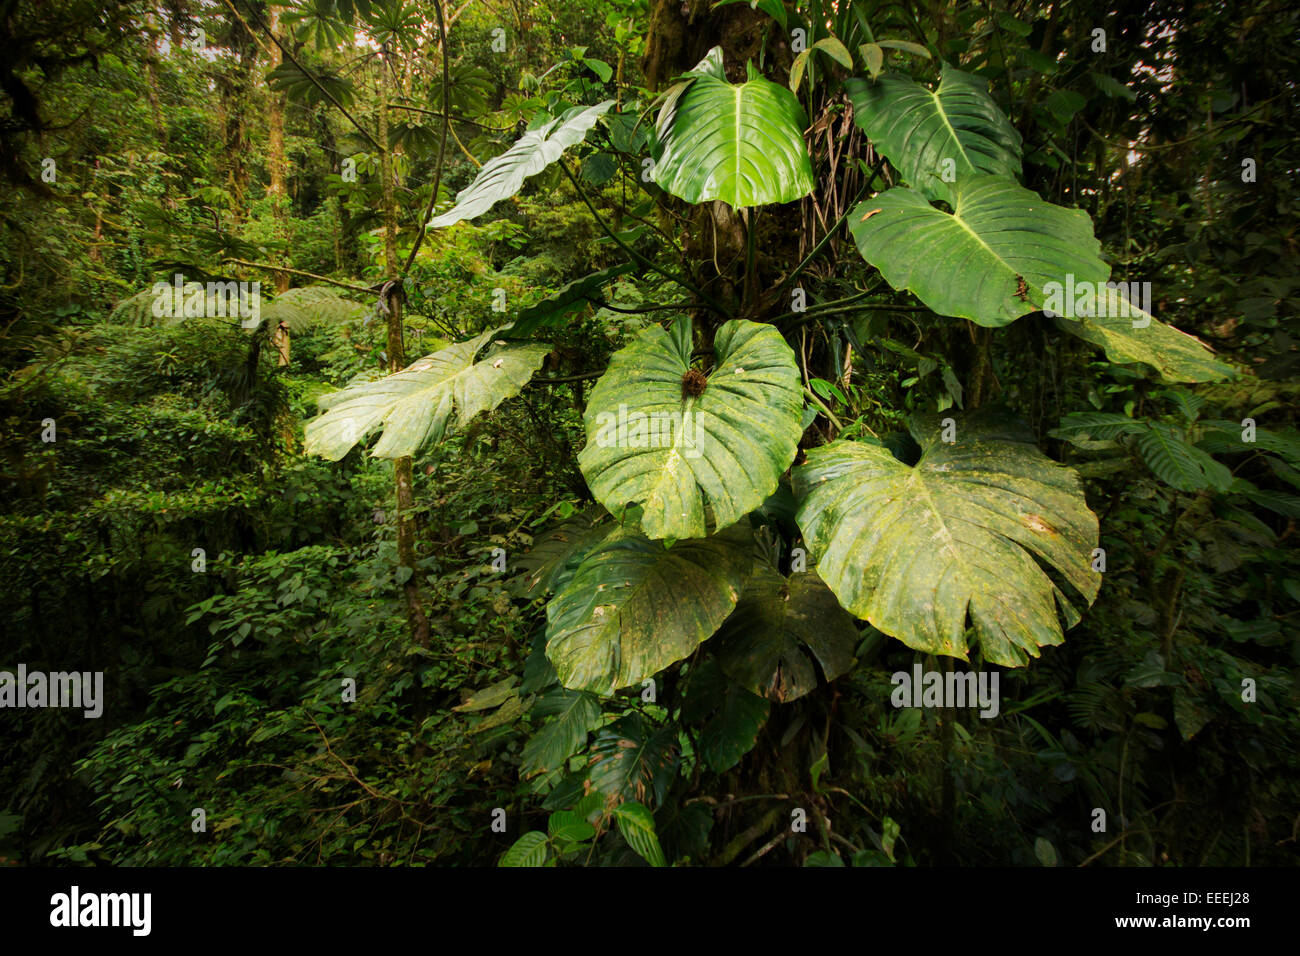 Big epiphyte plants growing high up on trees in the beautiful, lush Costa Rican cloudforest. Stock Photo